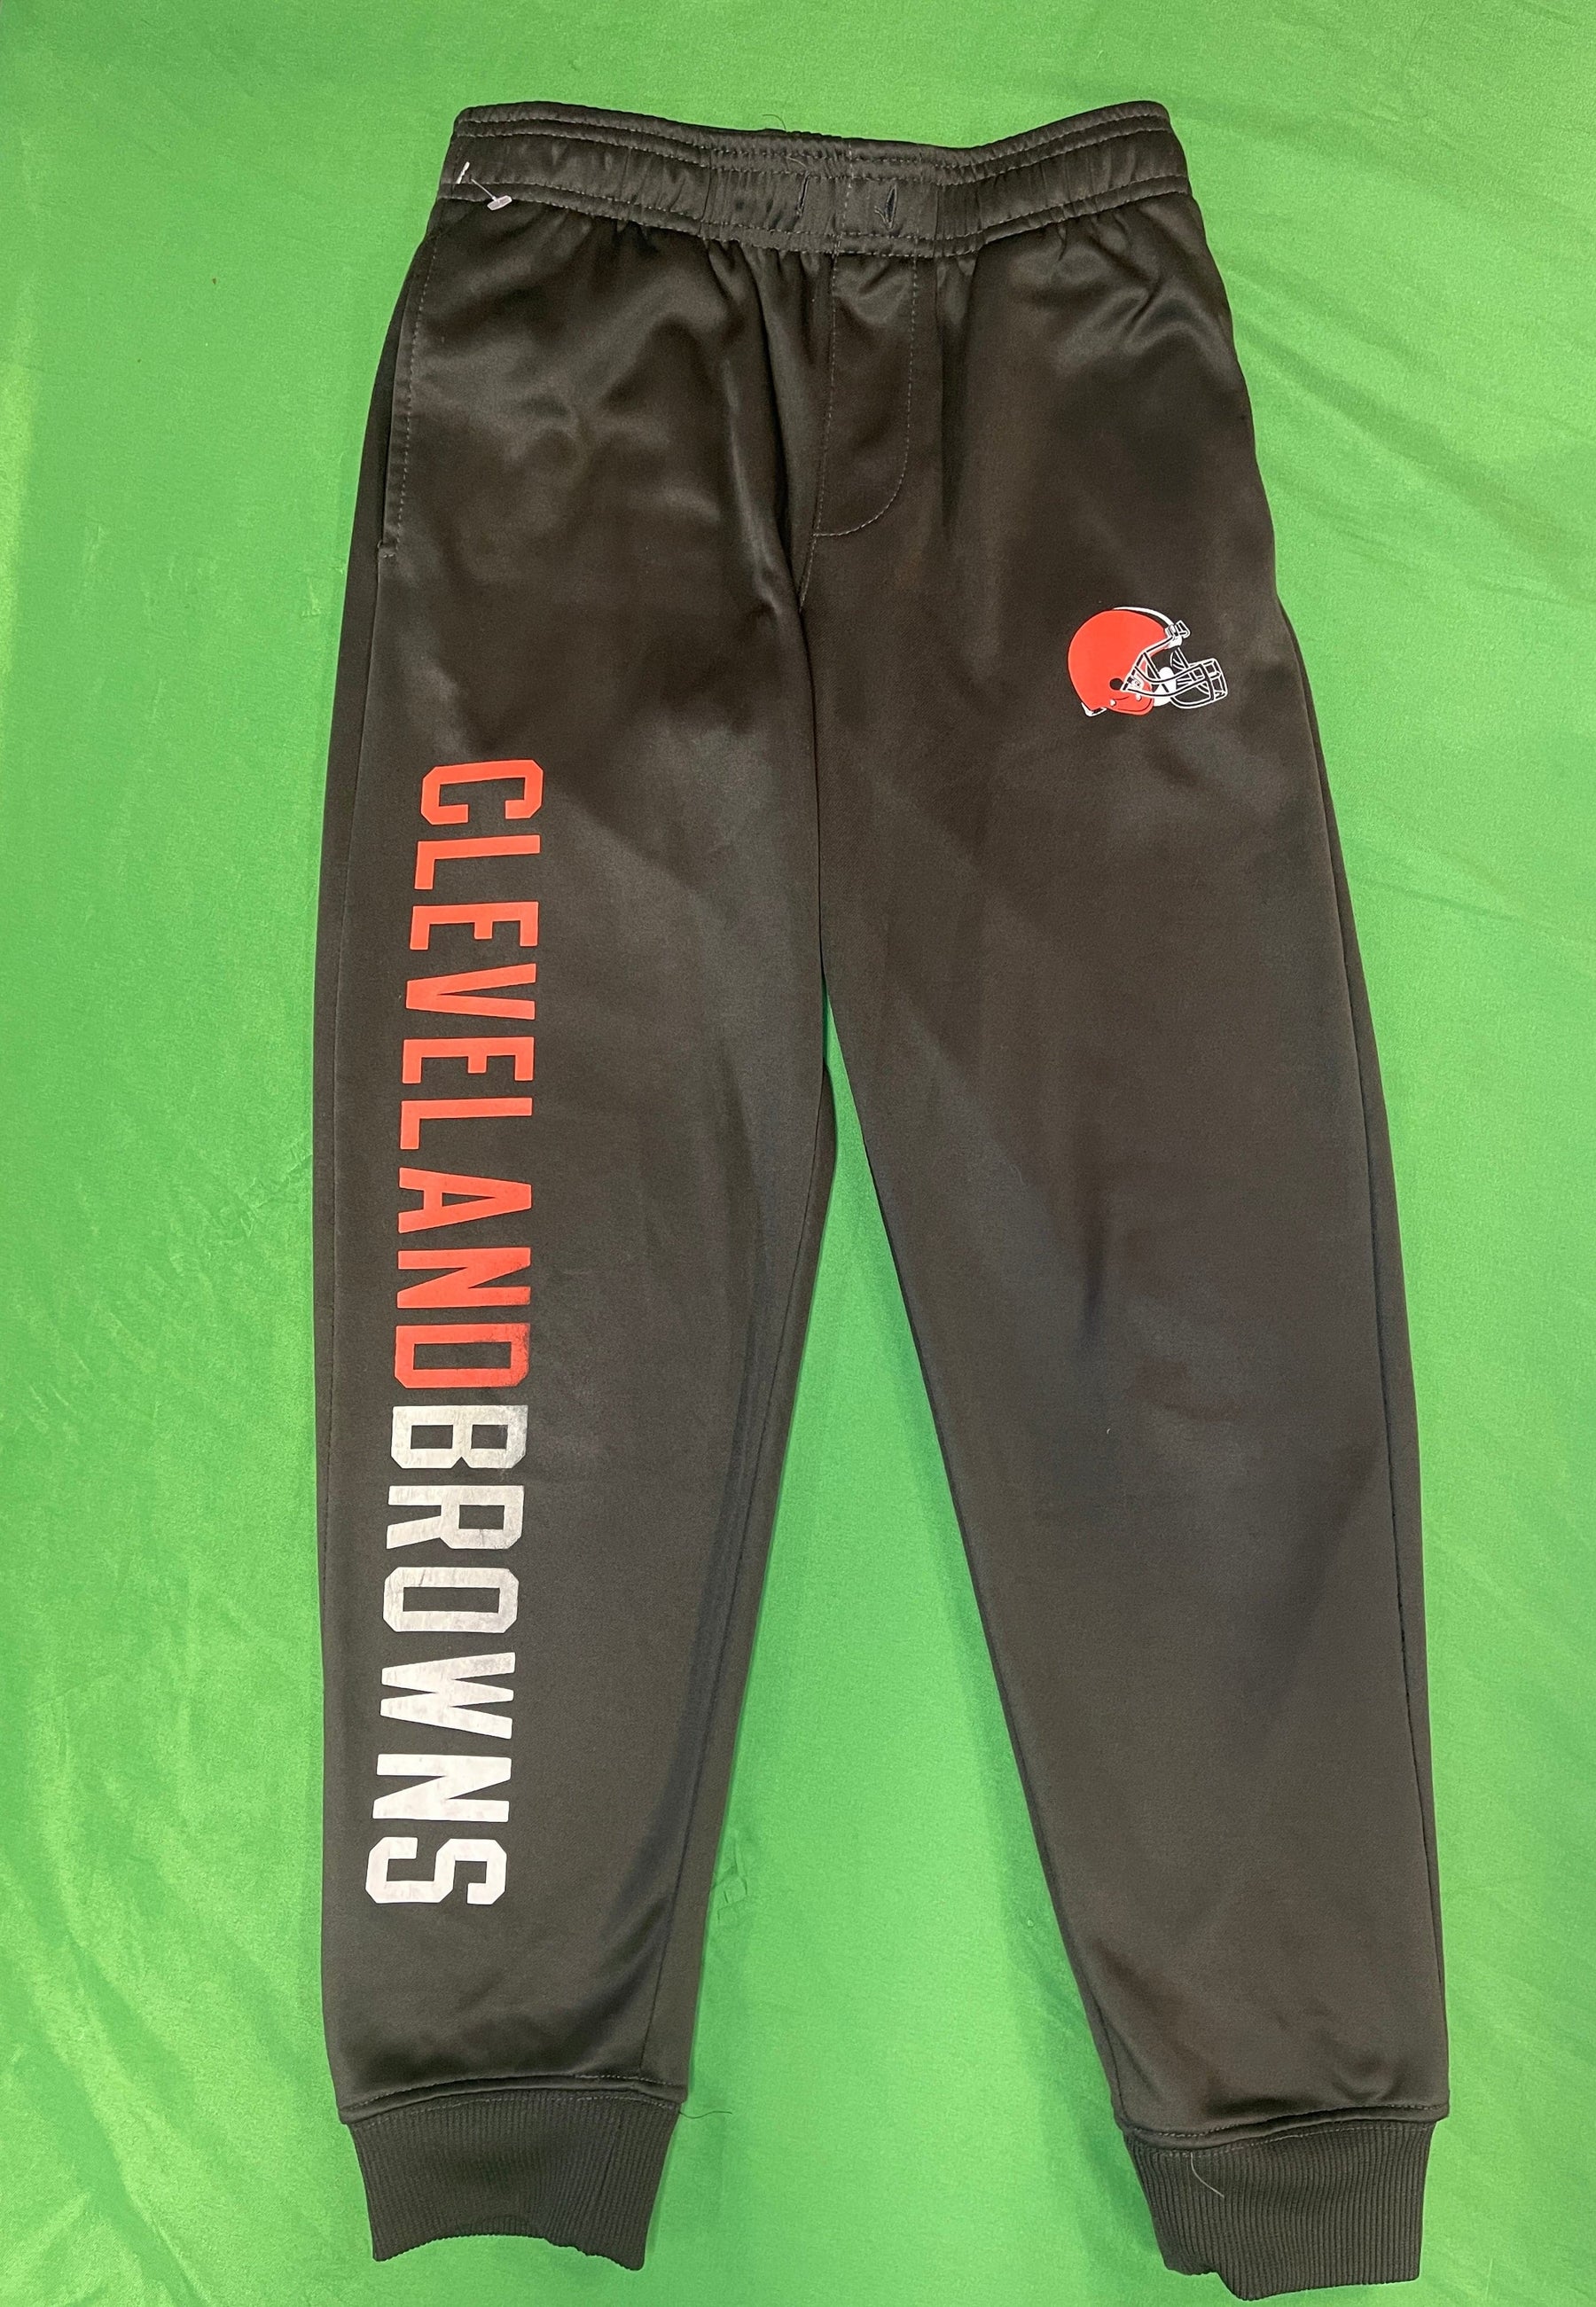 NFL Cleveland Browns Spellout Joggers Youth Medium 10-12